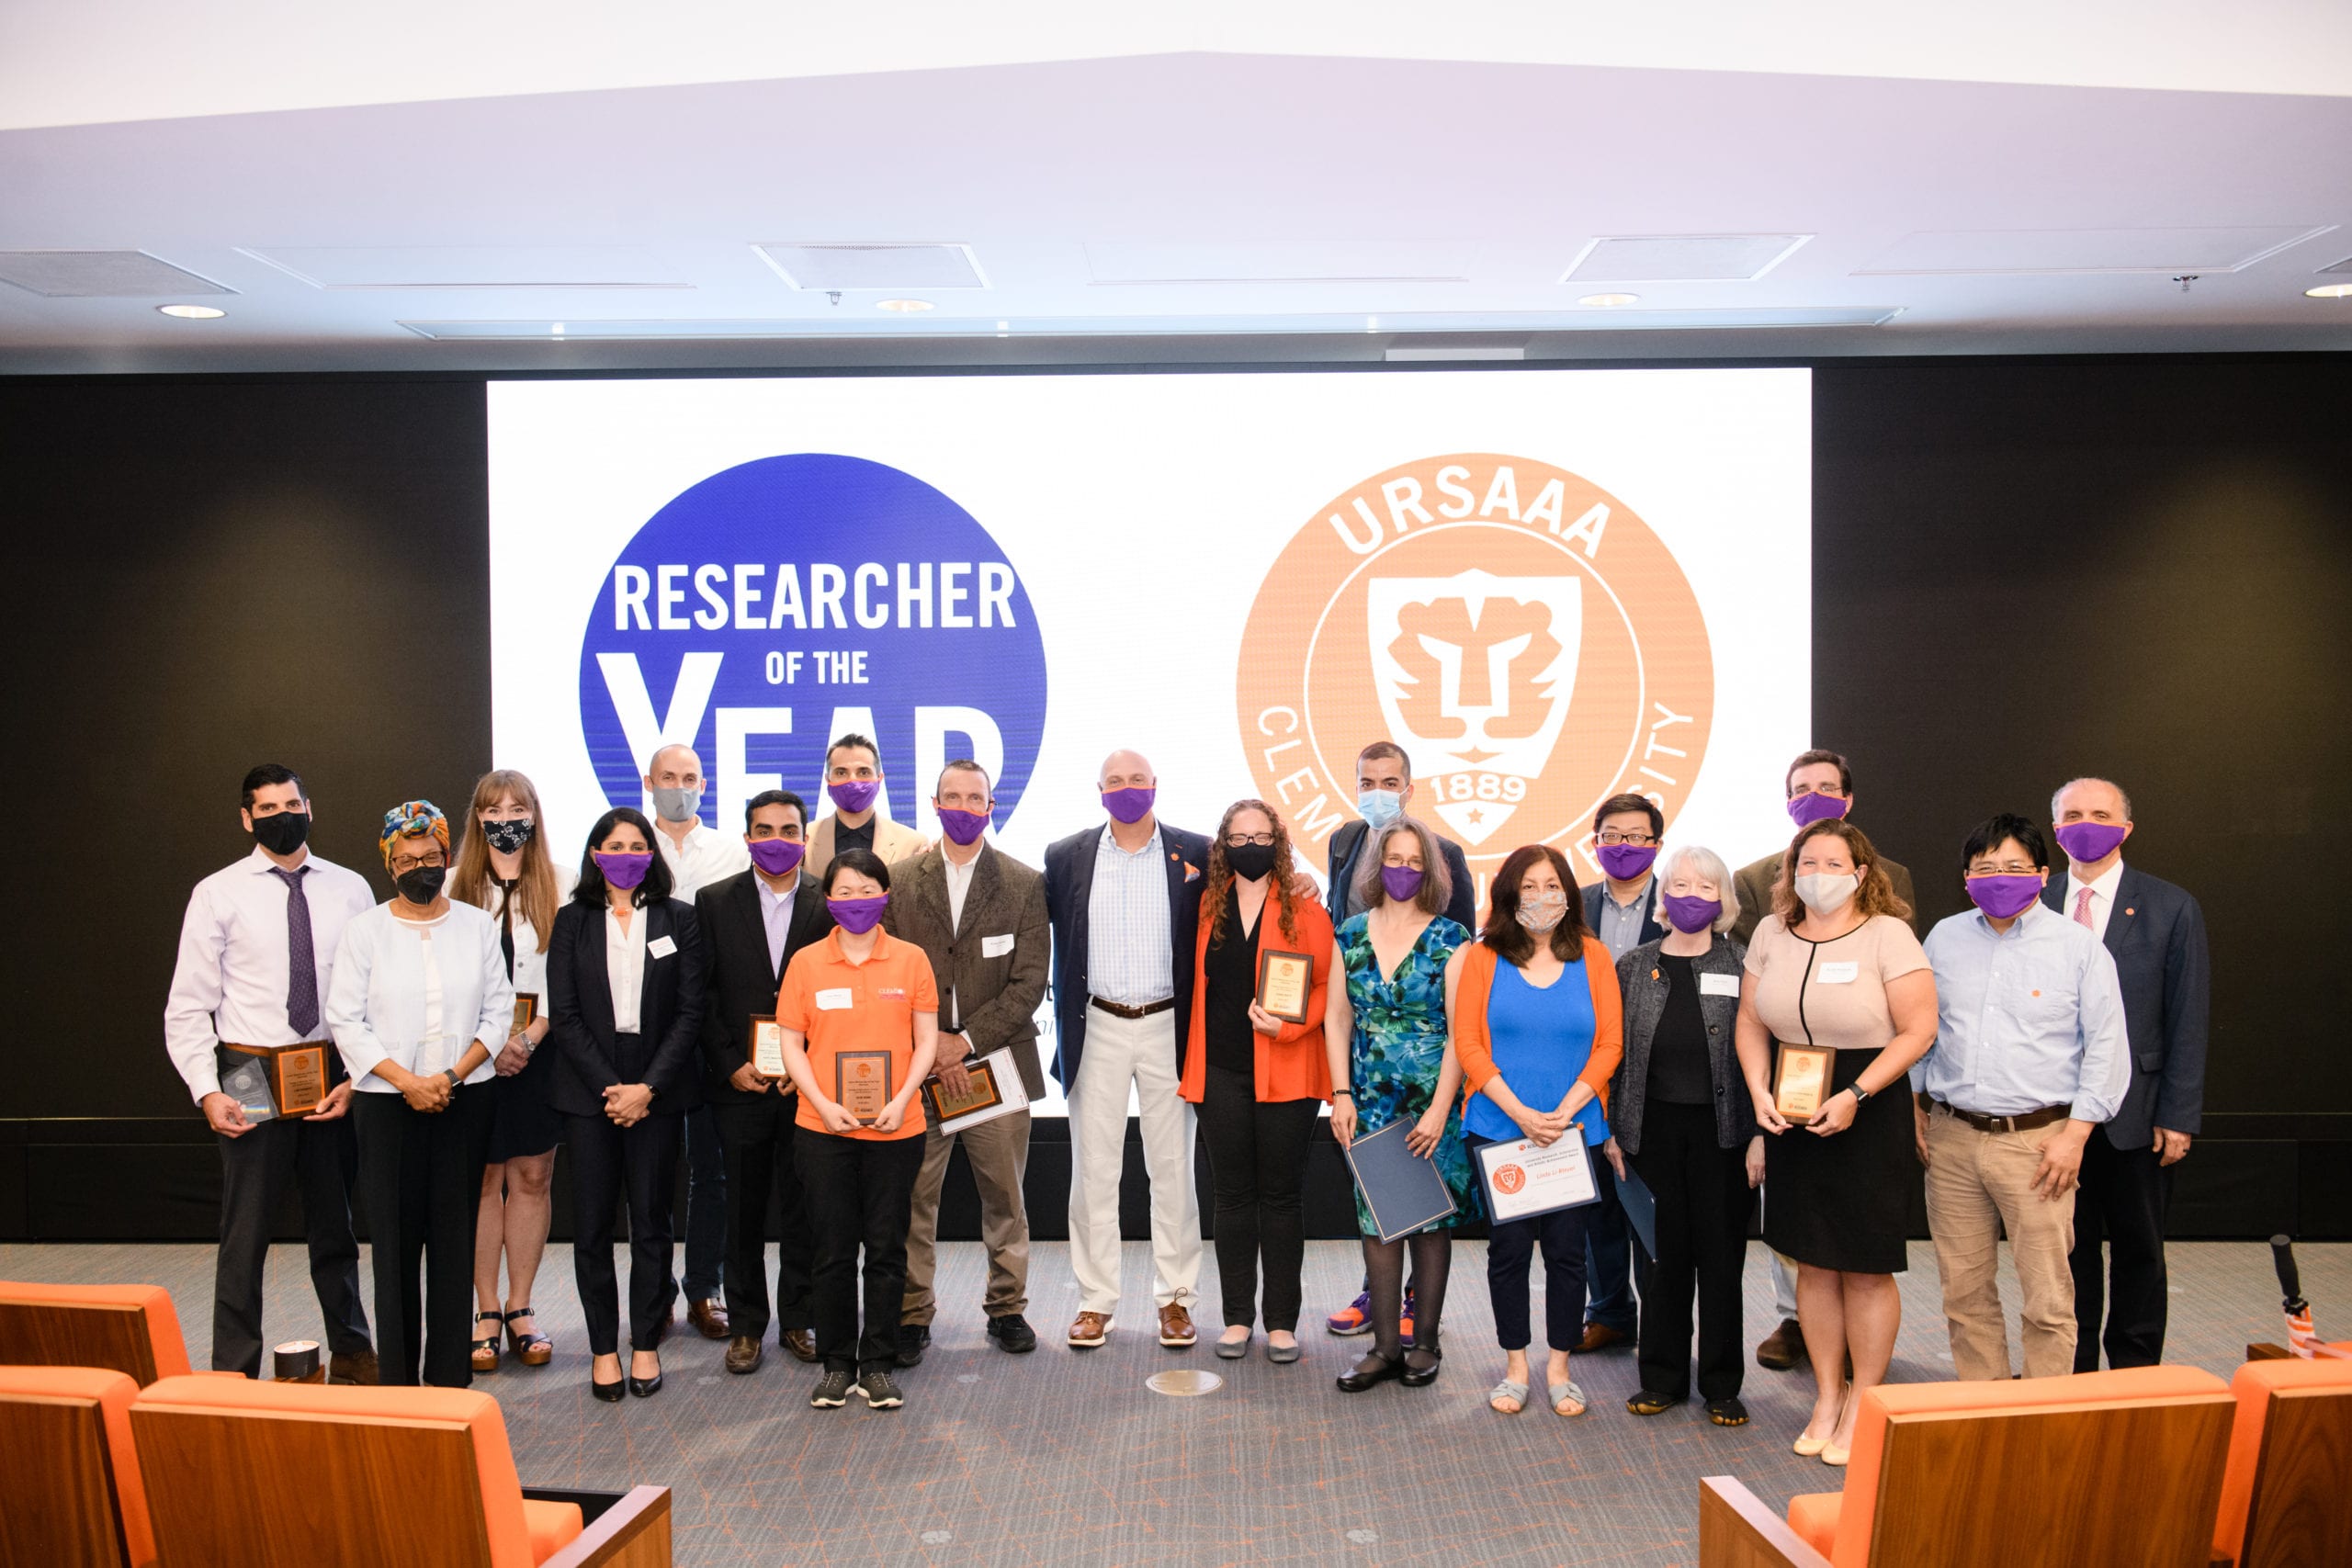 Researcher of the Year nominees and recipients of the University Research, Scholarship and Artistic Achievement Awards gather for a group photo with Clemson University President Jim Clements, center.